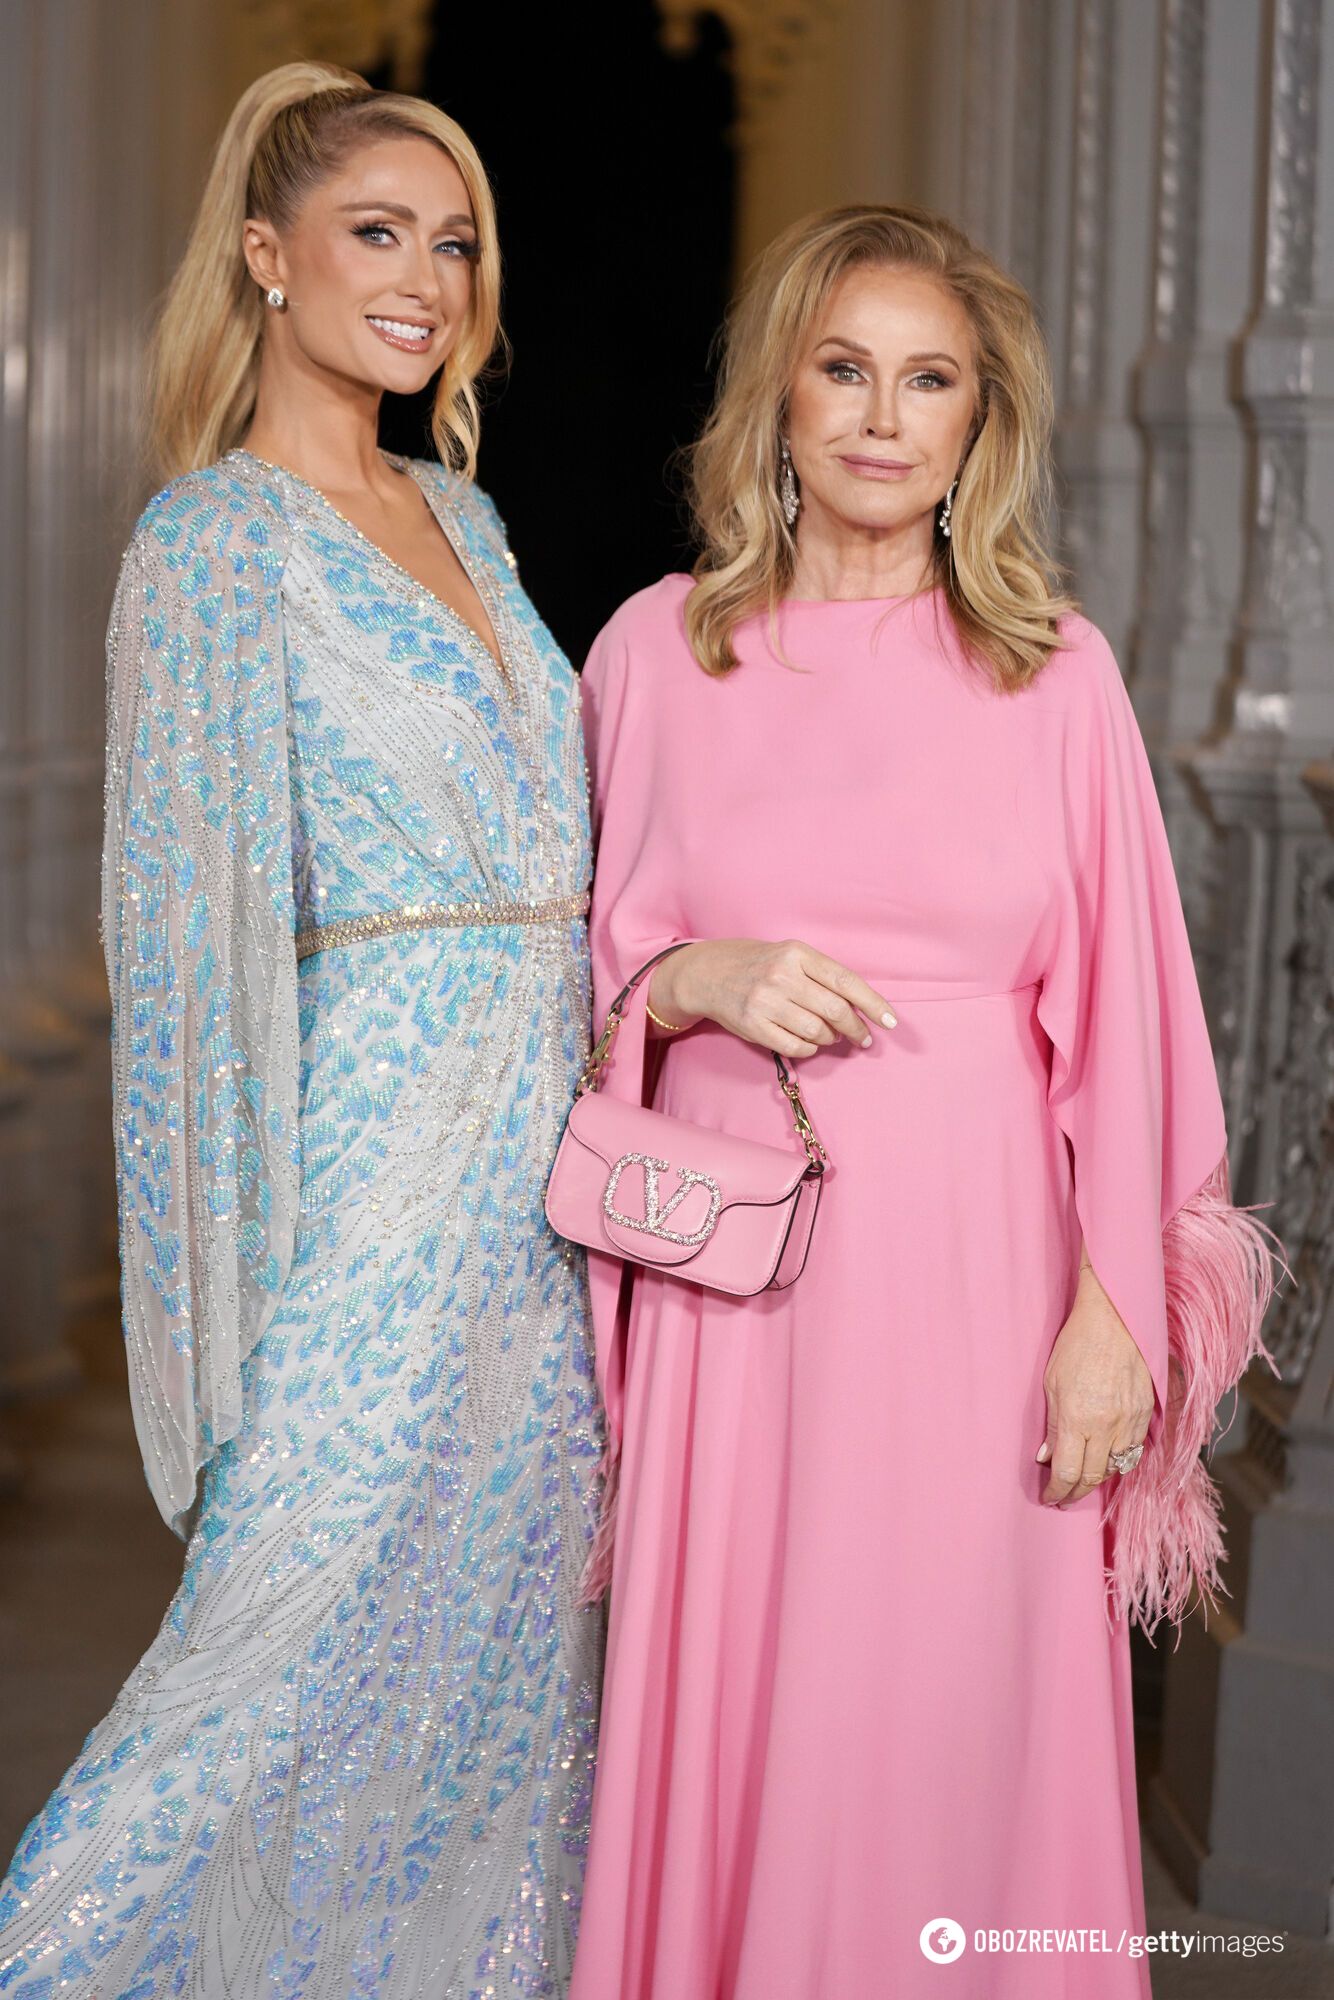 ''Oh God, the neck! Did they ever hold babies before?!'' Paris Hilton and her mother, Kathy Hilton, faced criticism over a video featuring the newborn Phoenix